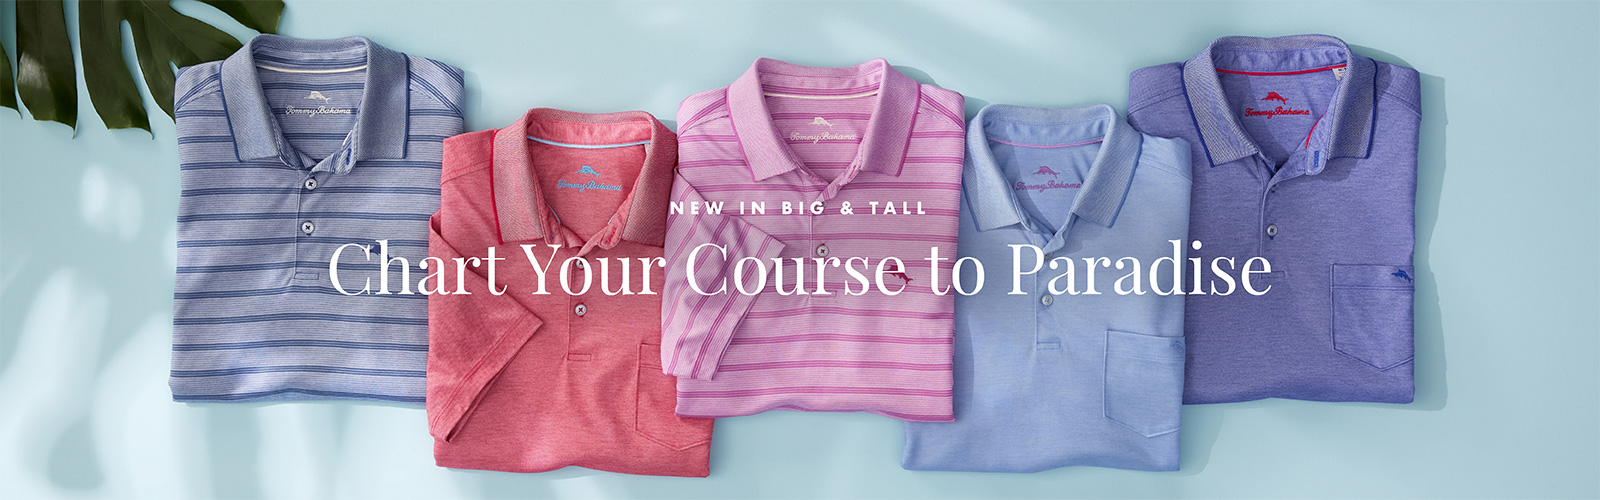 New in Big & Tall - Chart Your Course to Paradise